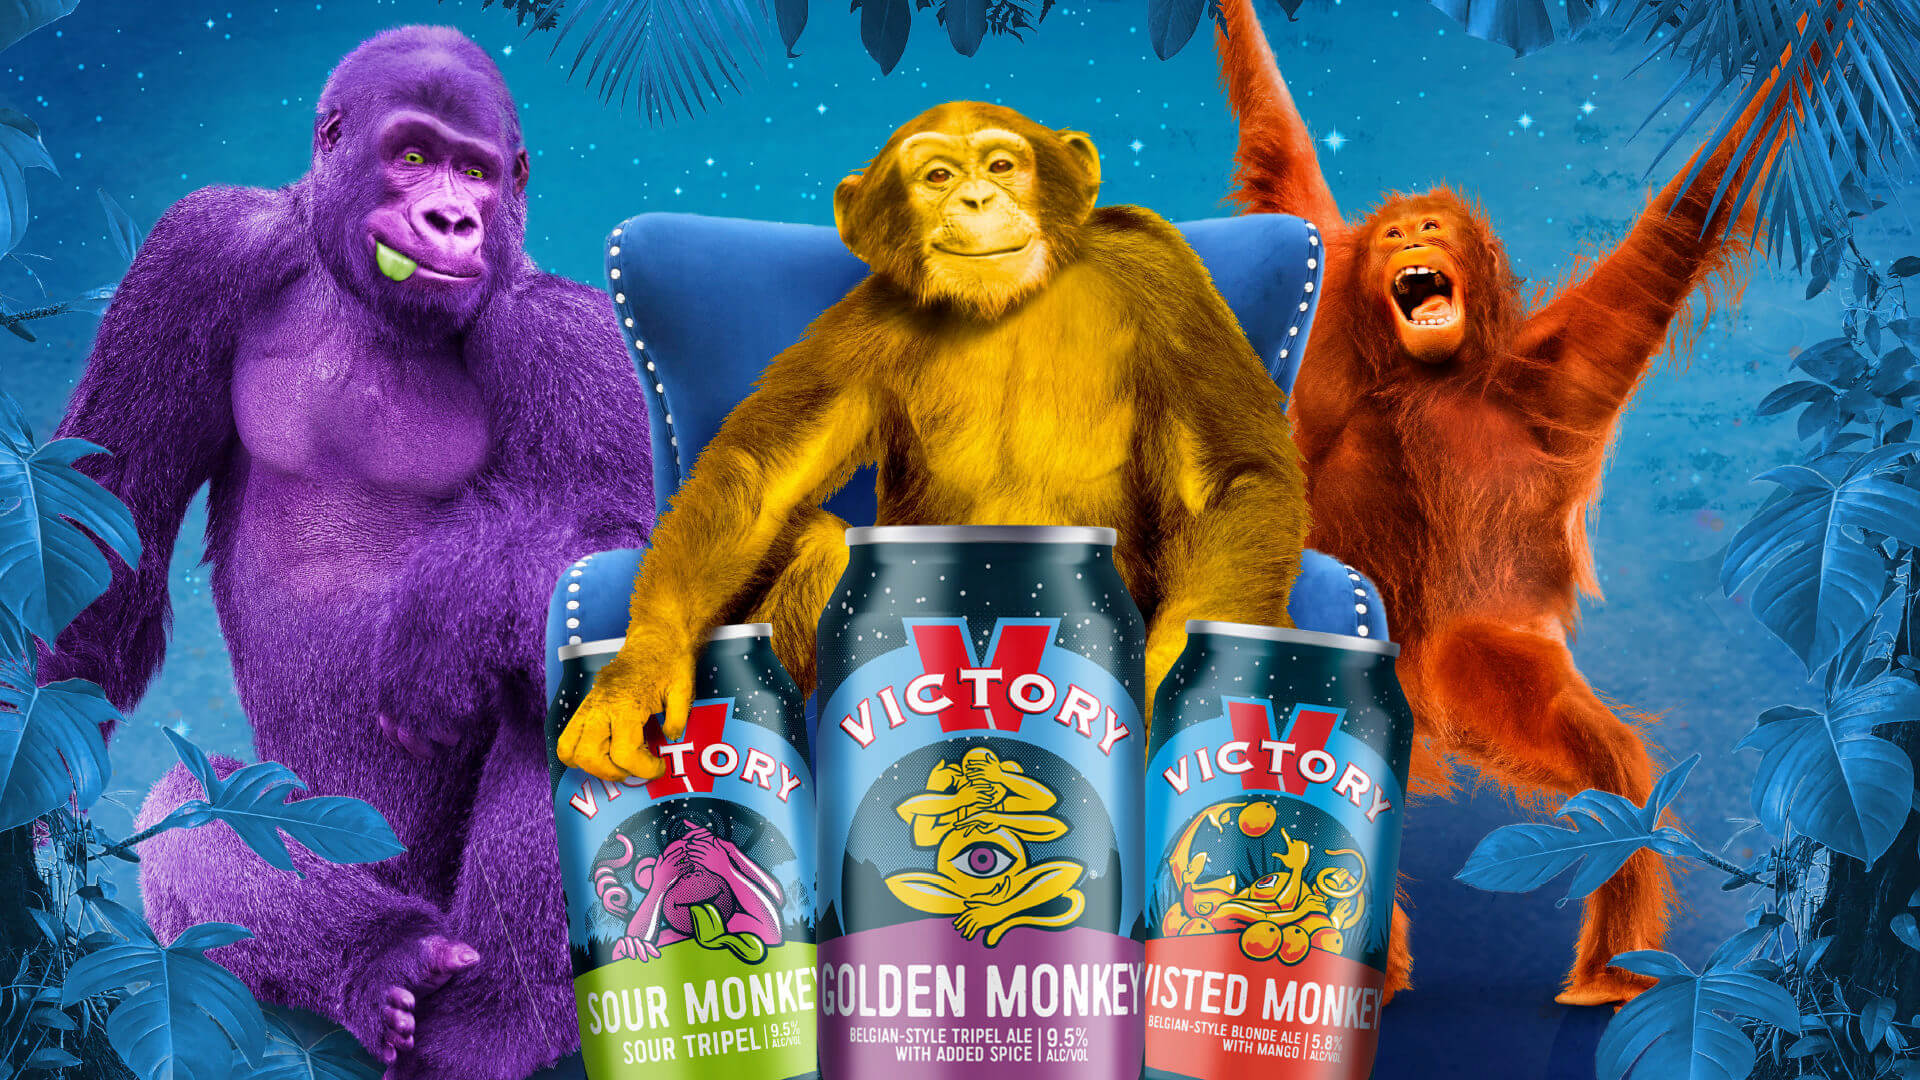 Three brightly colored monkeys sitting behind the three flavors of “Monkey” beers (Sour, Golden, & Twisted)